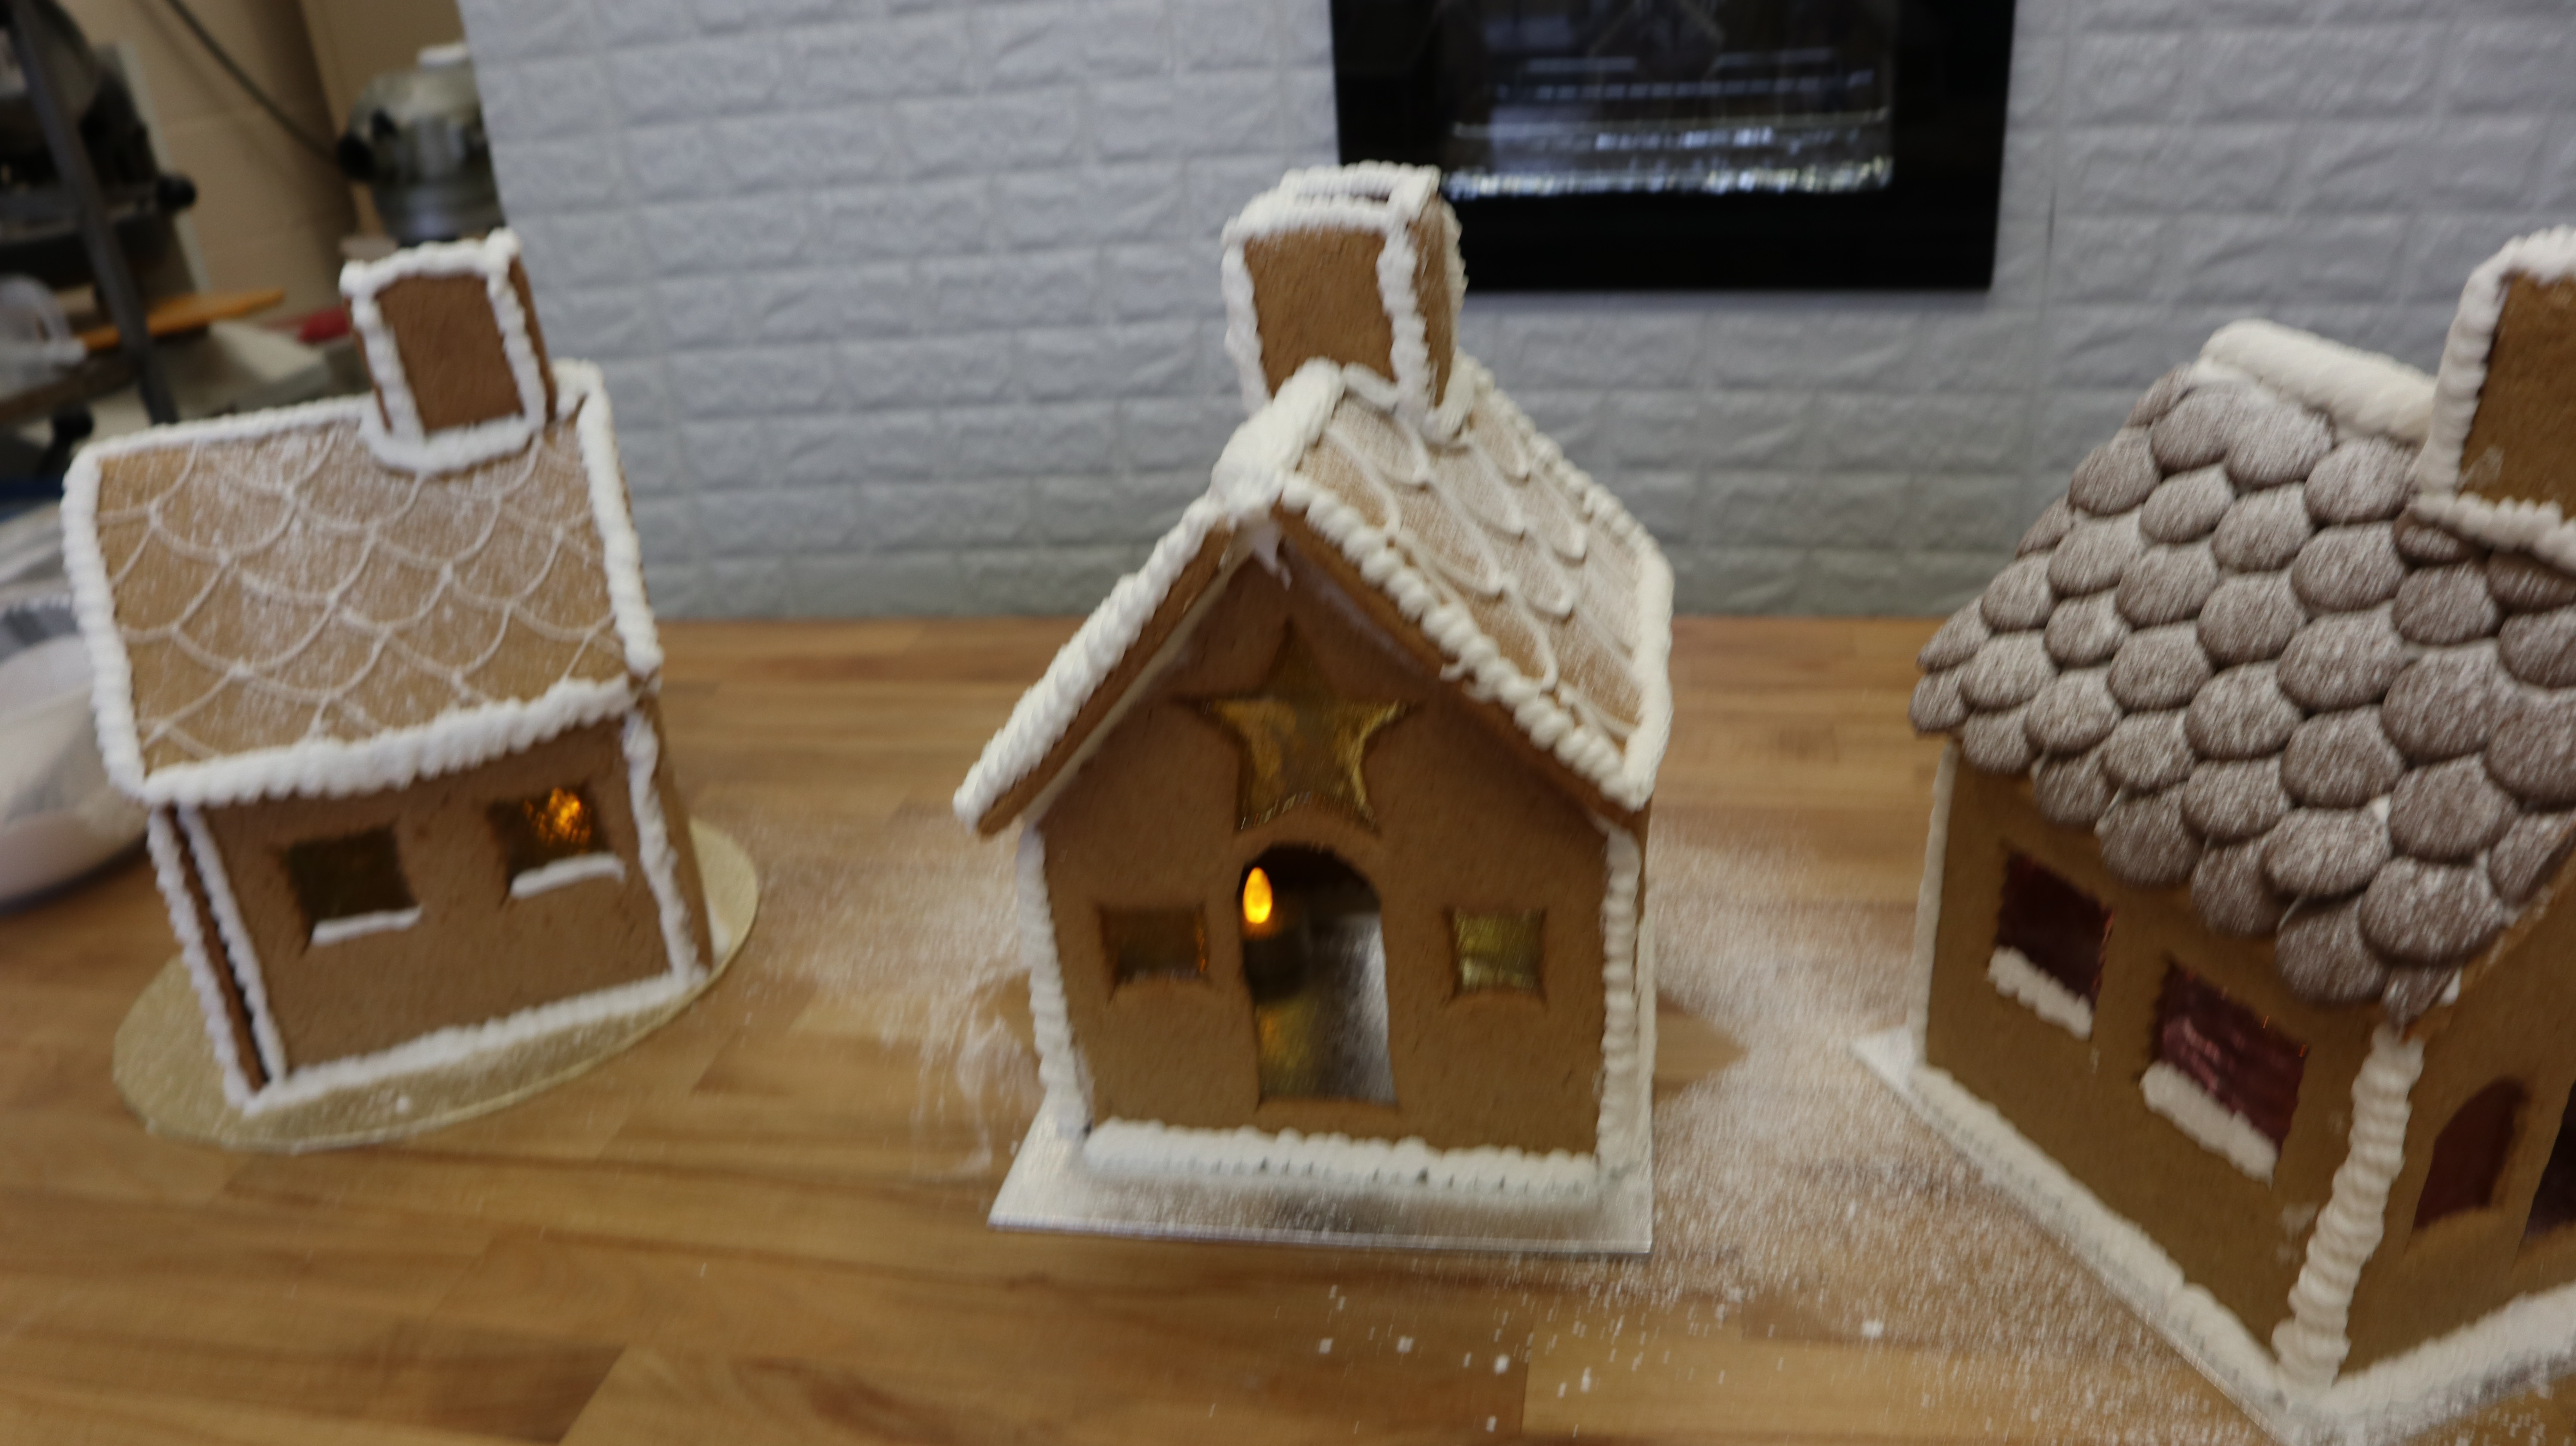 GingerBread Houses